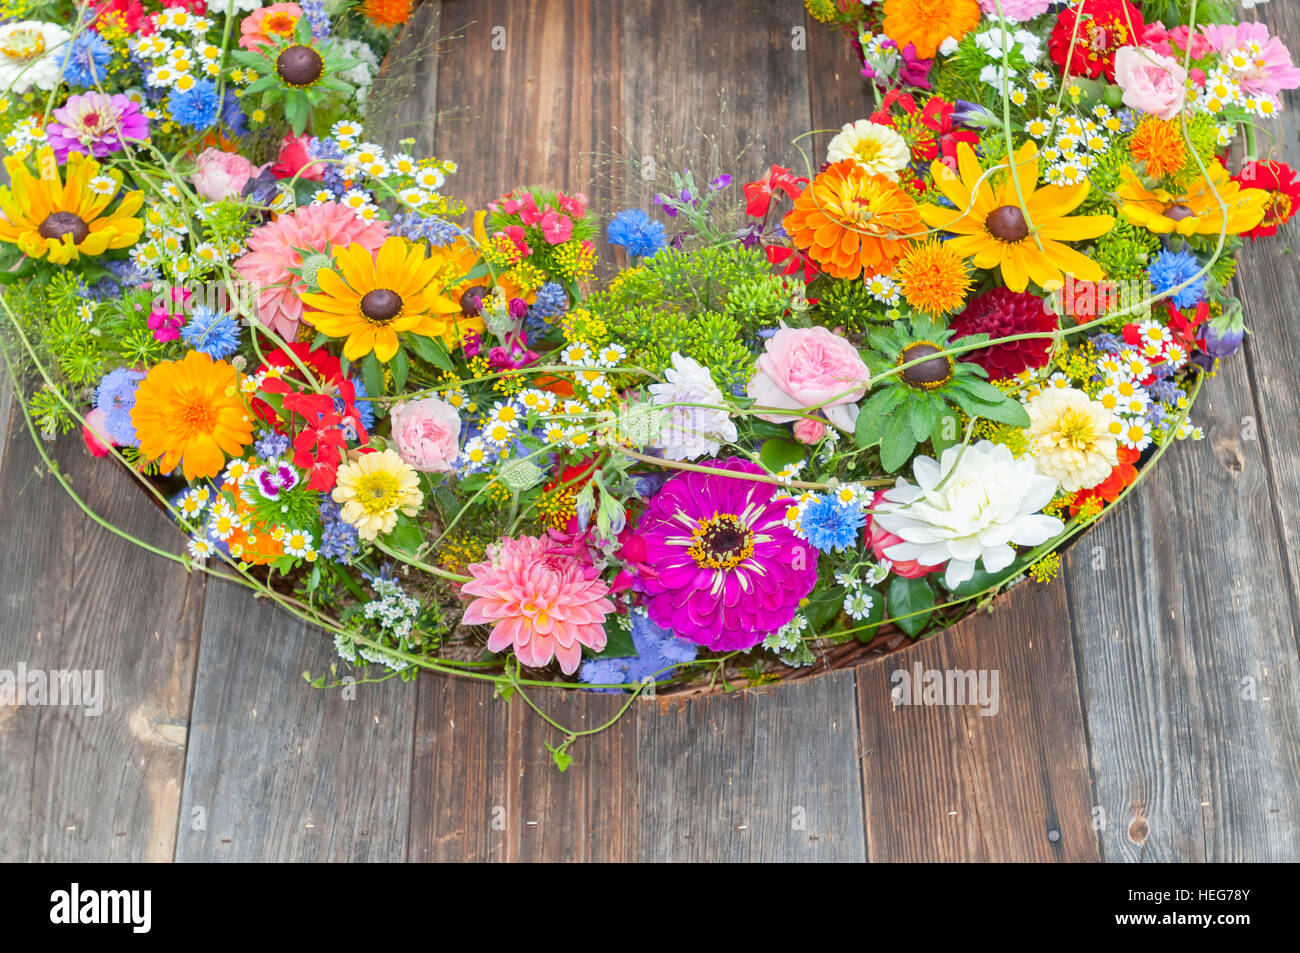 garland with spring flowers on wooden underground Stock Photo